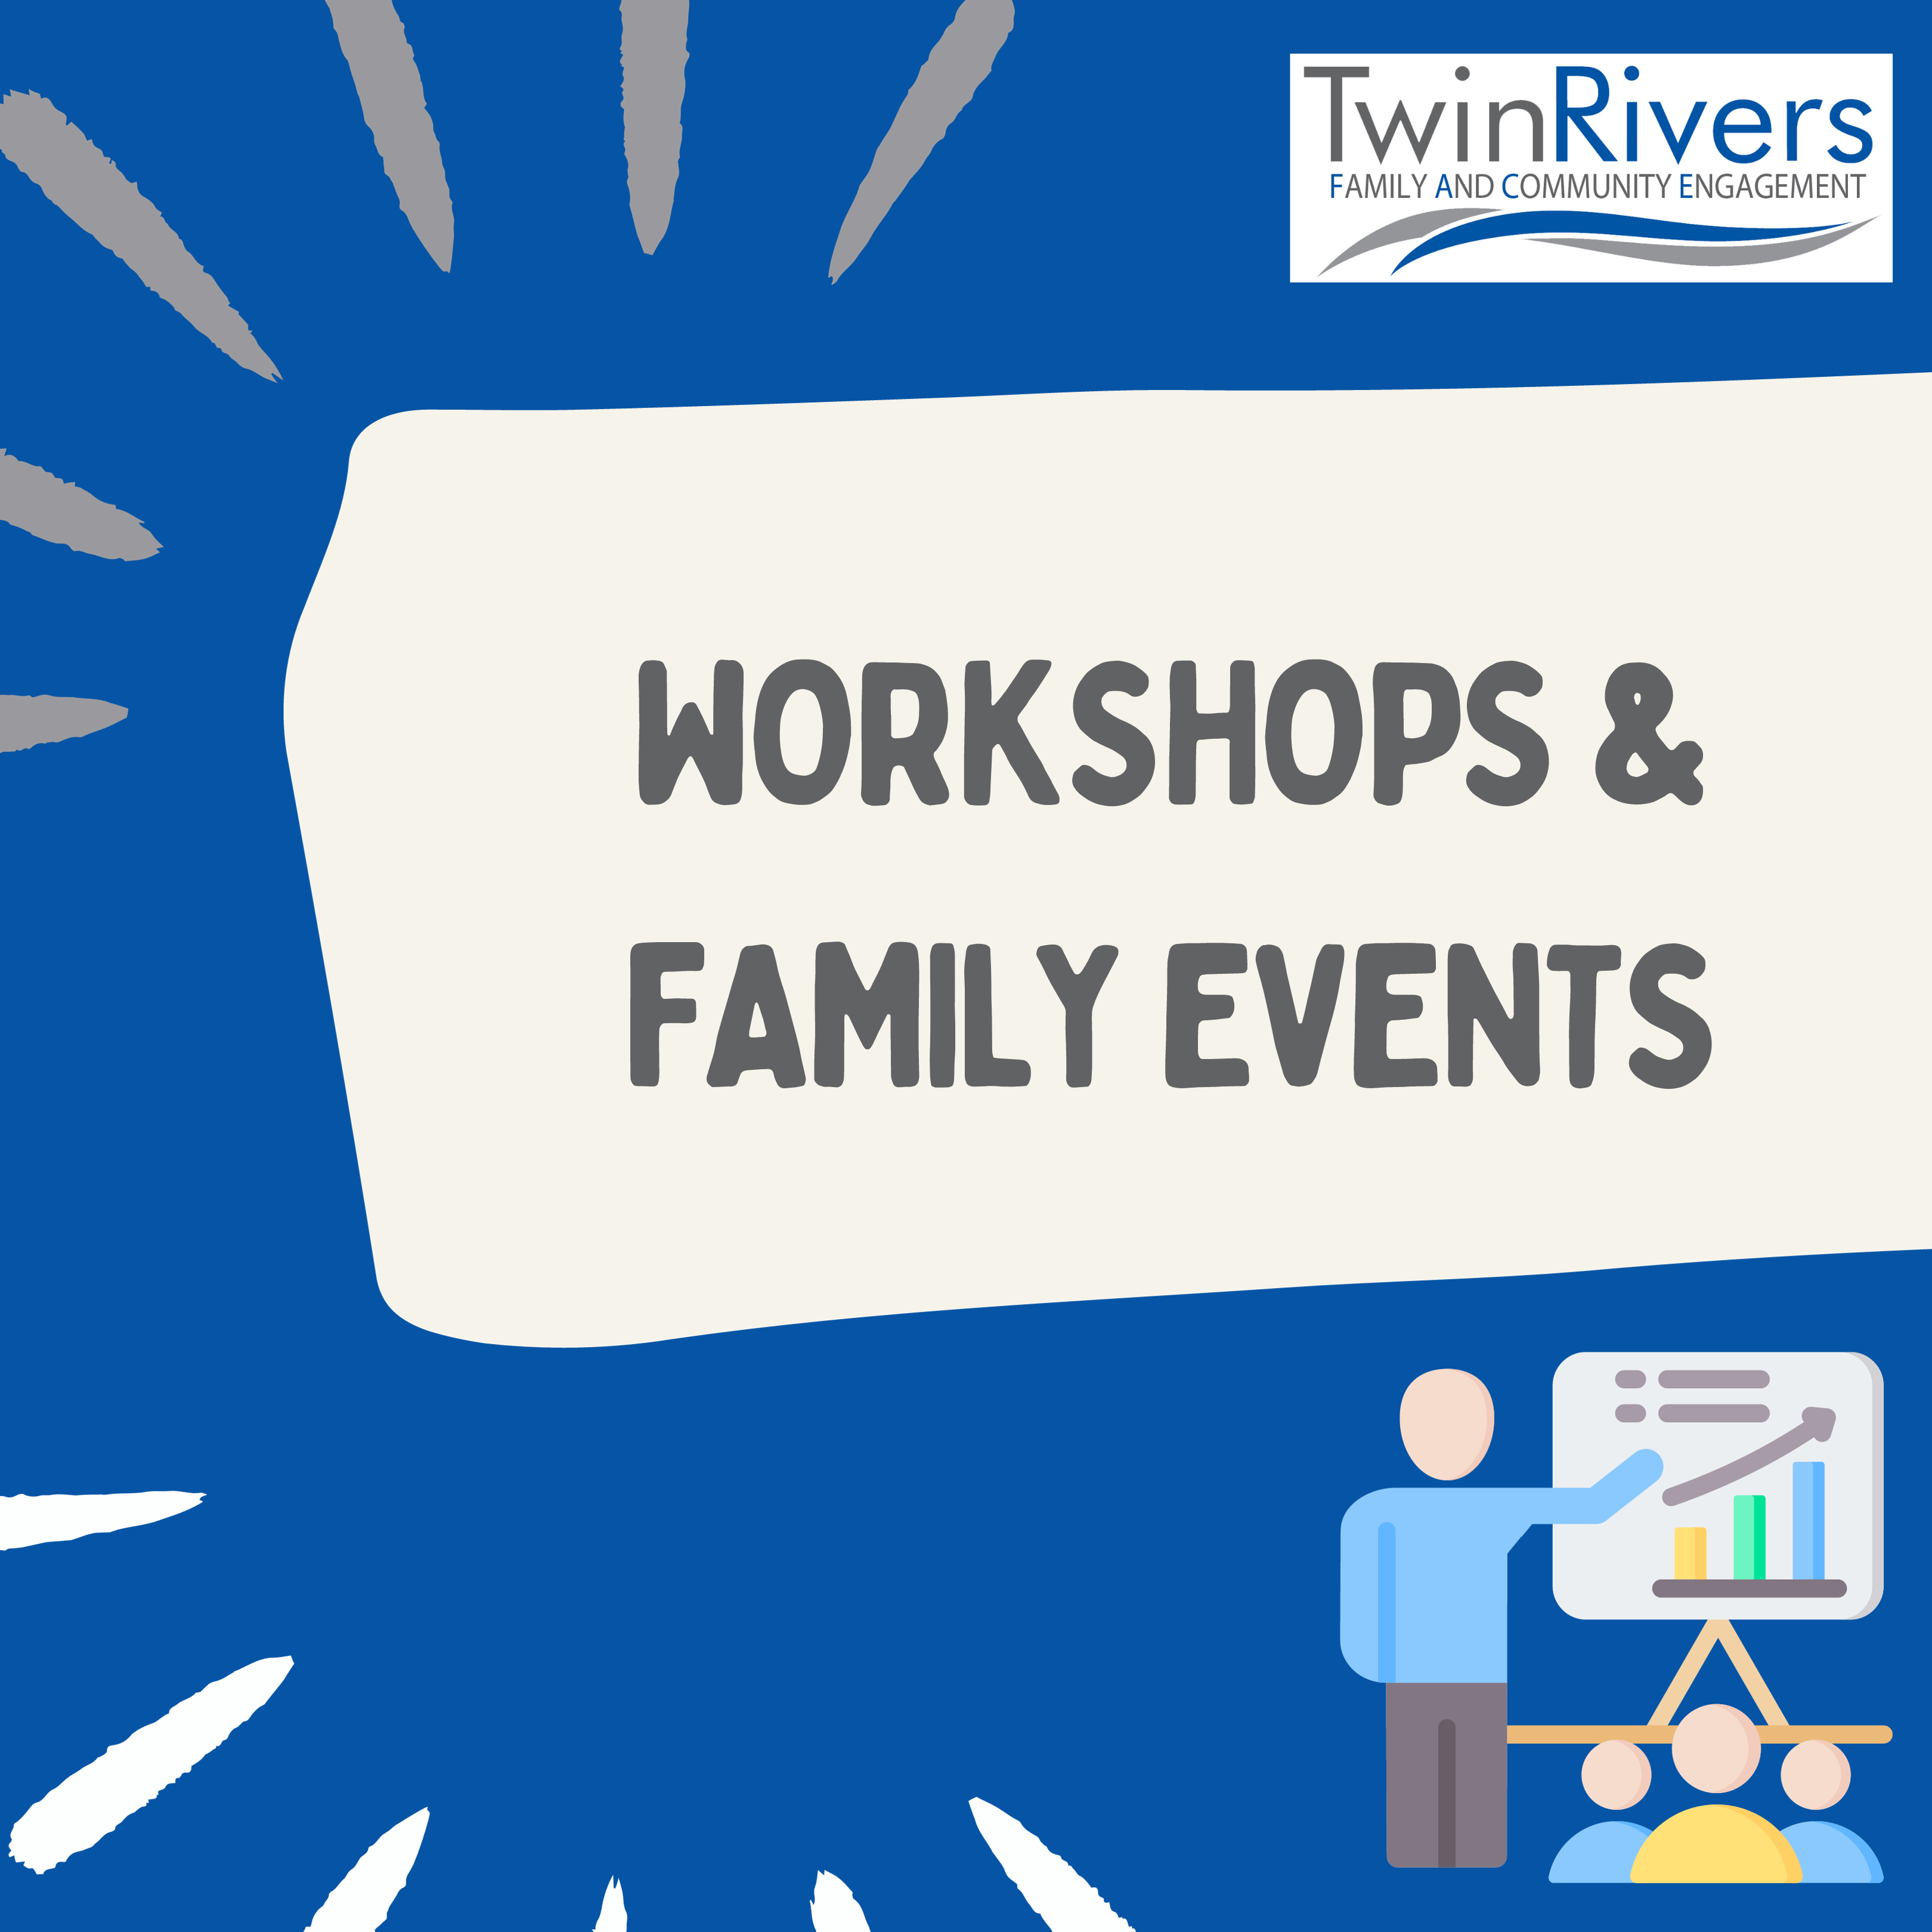 Workshops & Family Events